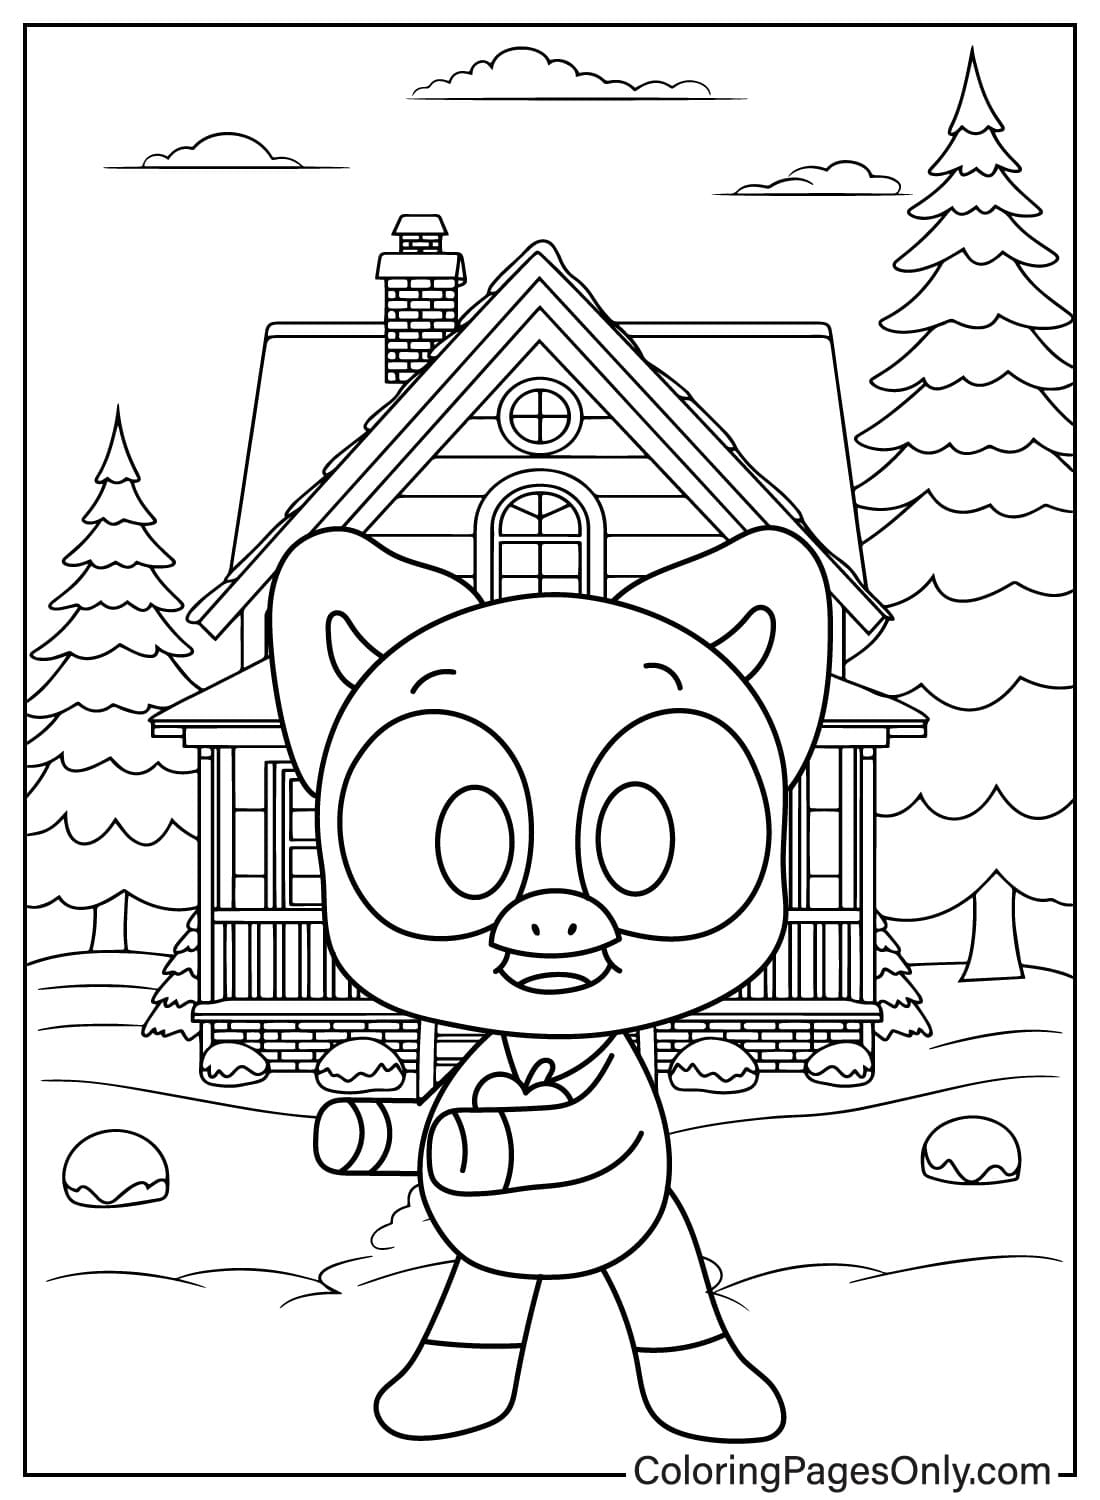 Cute PickyPiggy Coloring Page from PickyPiggy